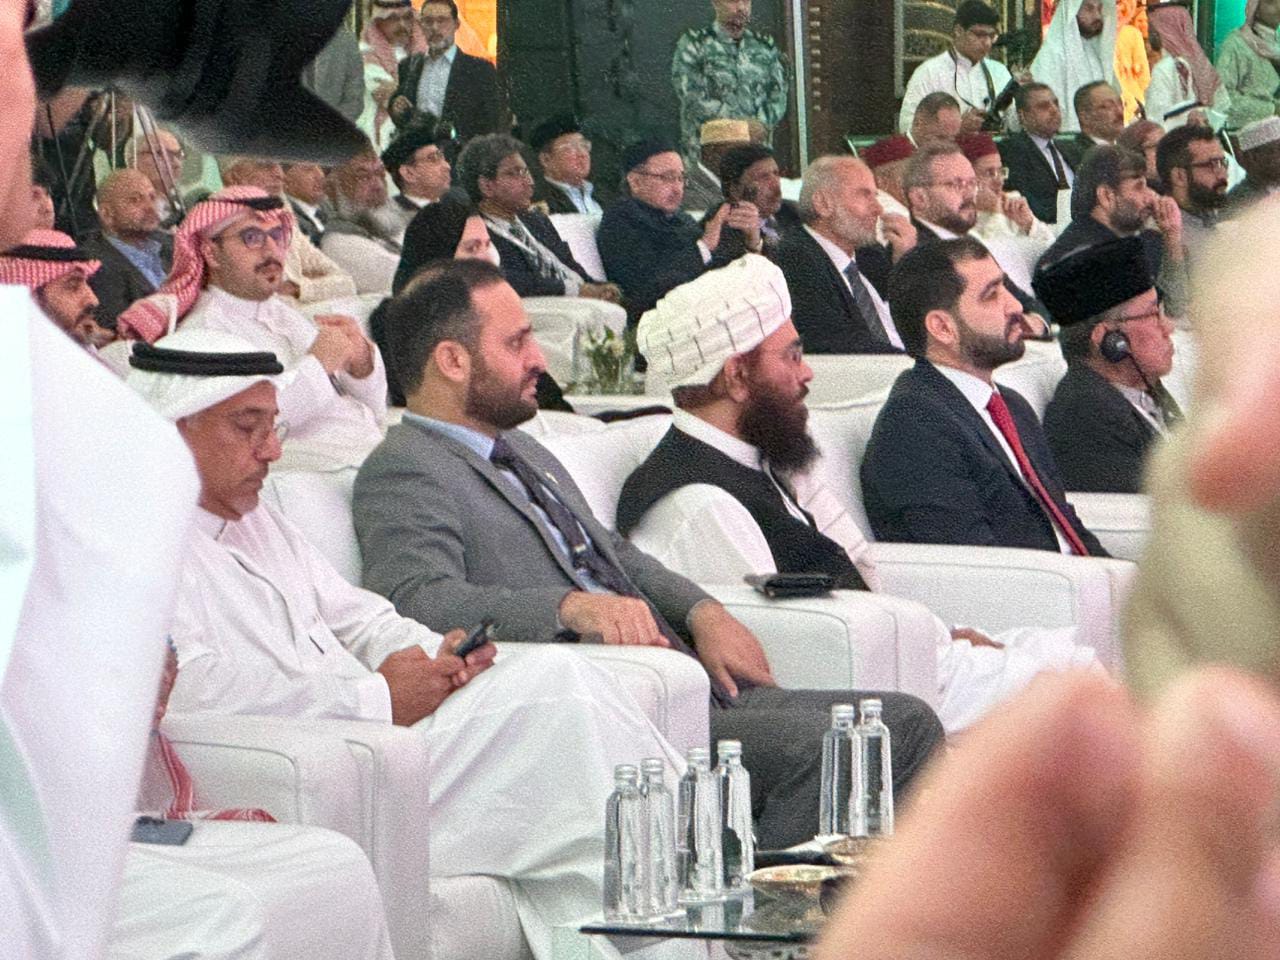 Participation of the Minister of MOHIA in the great Hajj Conference held in Jeddah, Saudi Arabia